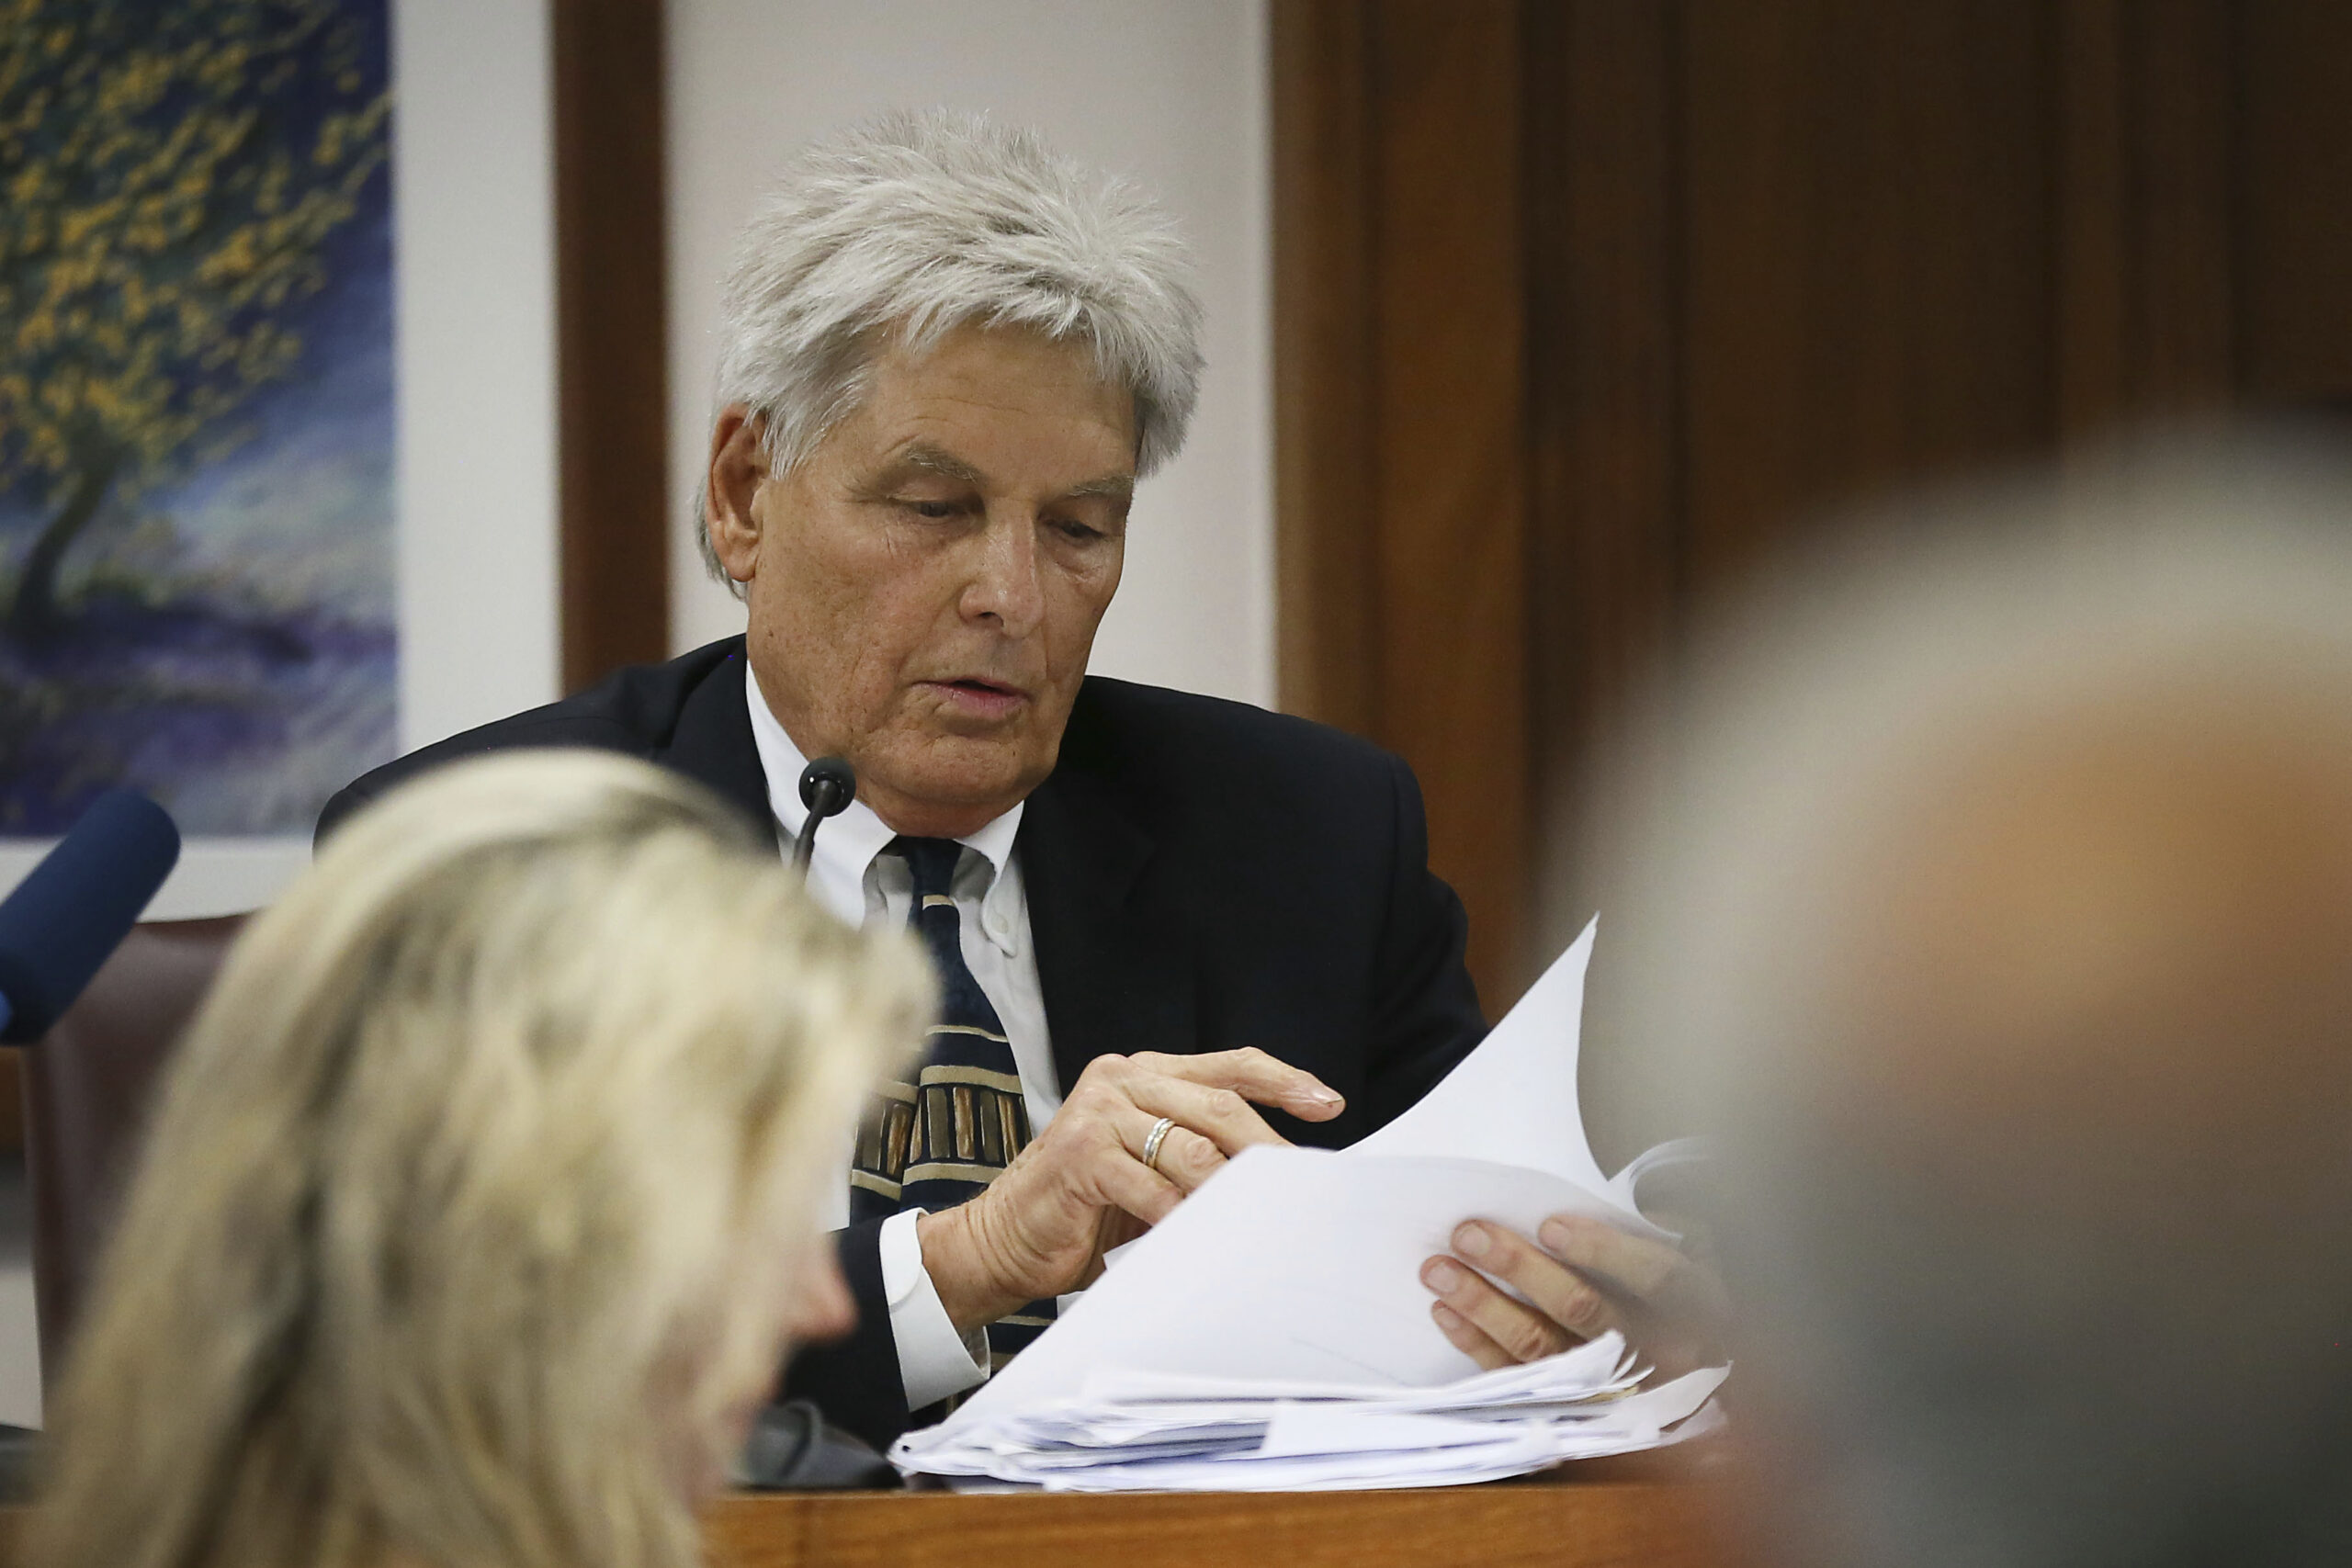 Economic expert Bernard Pettingill is called to testify to discuss the net worth of Alex Jones and Free Speech Systems Friday, Aug. 5, 2022, at the Travis County Courthouse in Austin, Texas. Jurors were asked to assess punitive damages against InfoWars host Alex Jones after awarding $4.1 million in actual damages to the parents of Jesse Lewis on Thursday. (Briana Sanchez/Austin American-Statesman via AP, Pool)